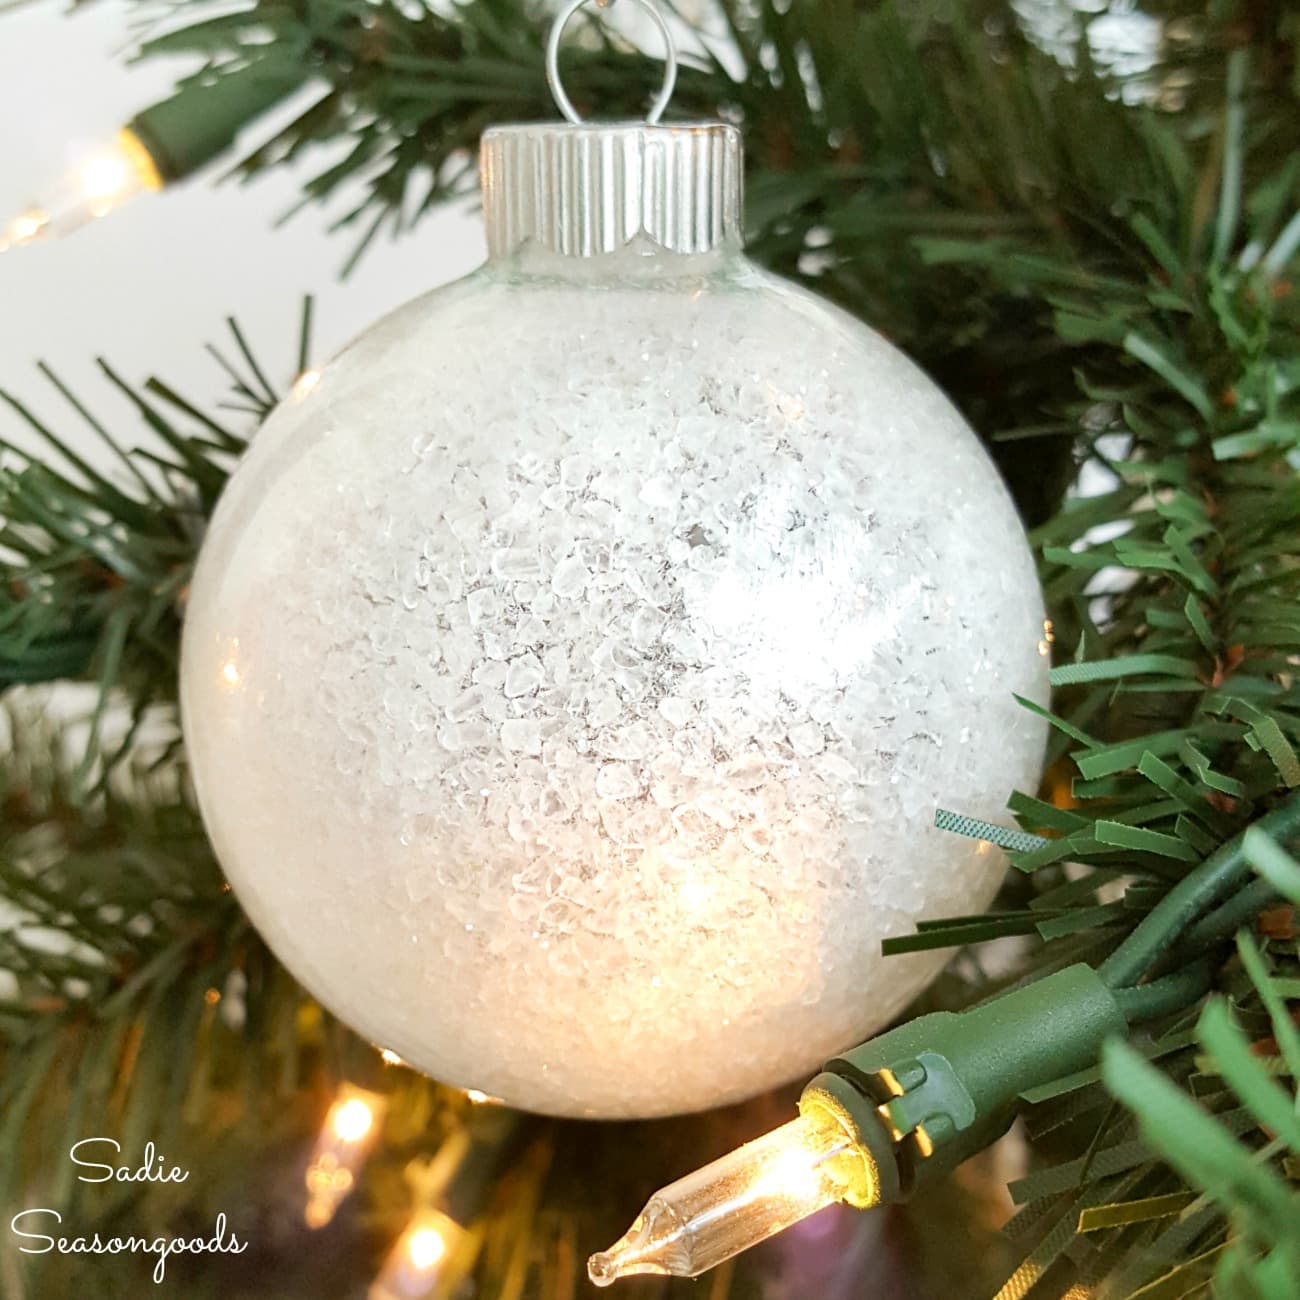 Snow Ornaments for Your Christmas Tree!